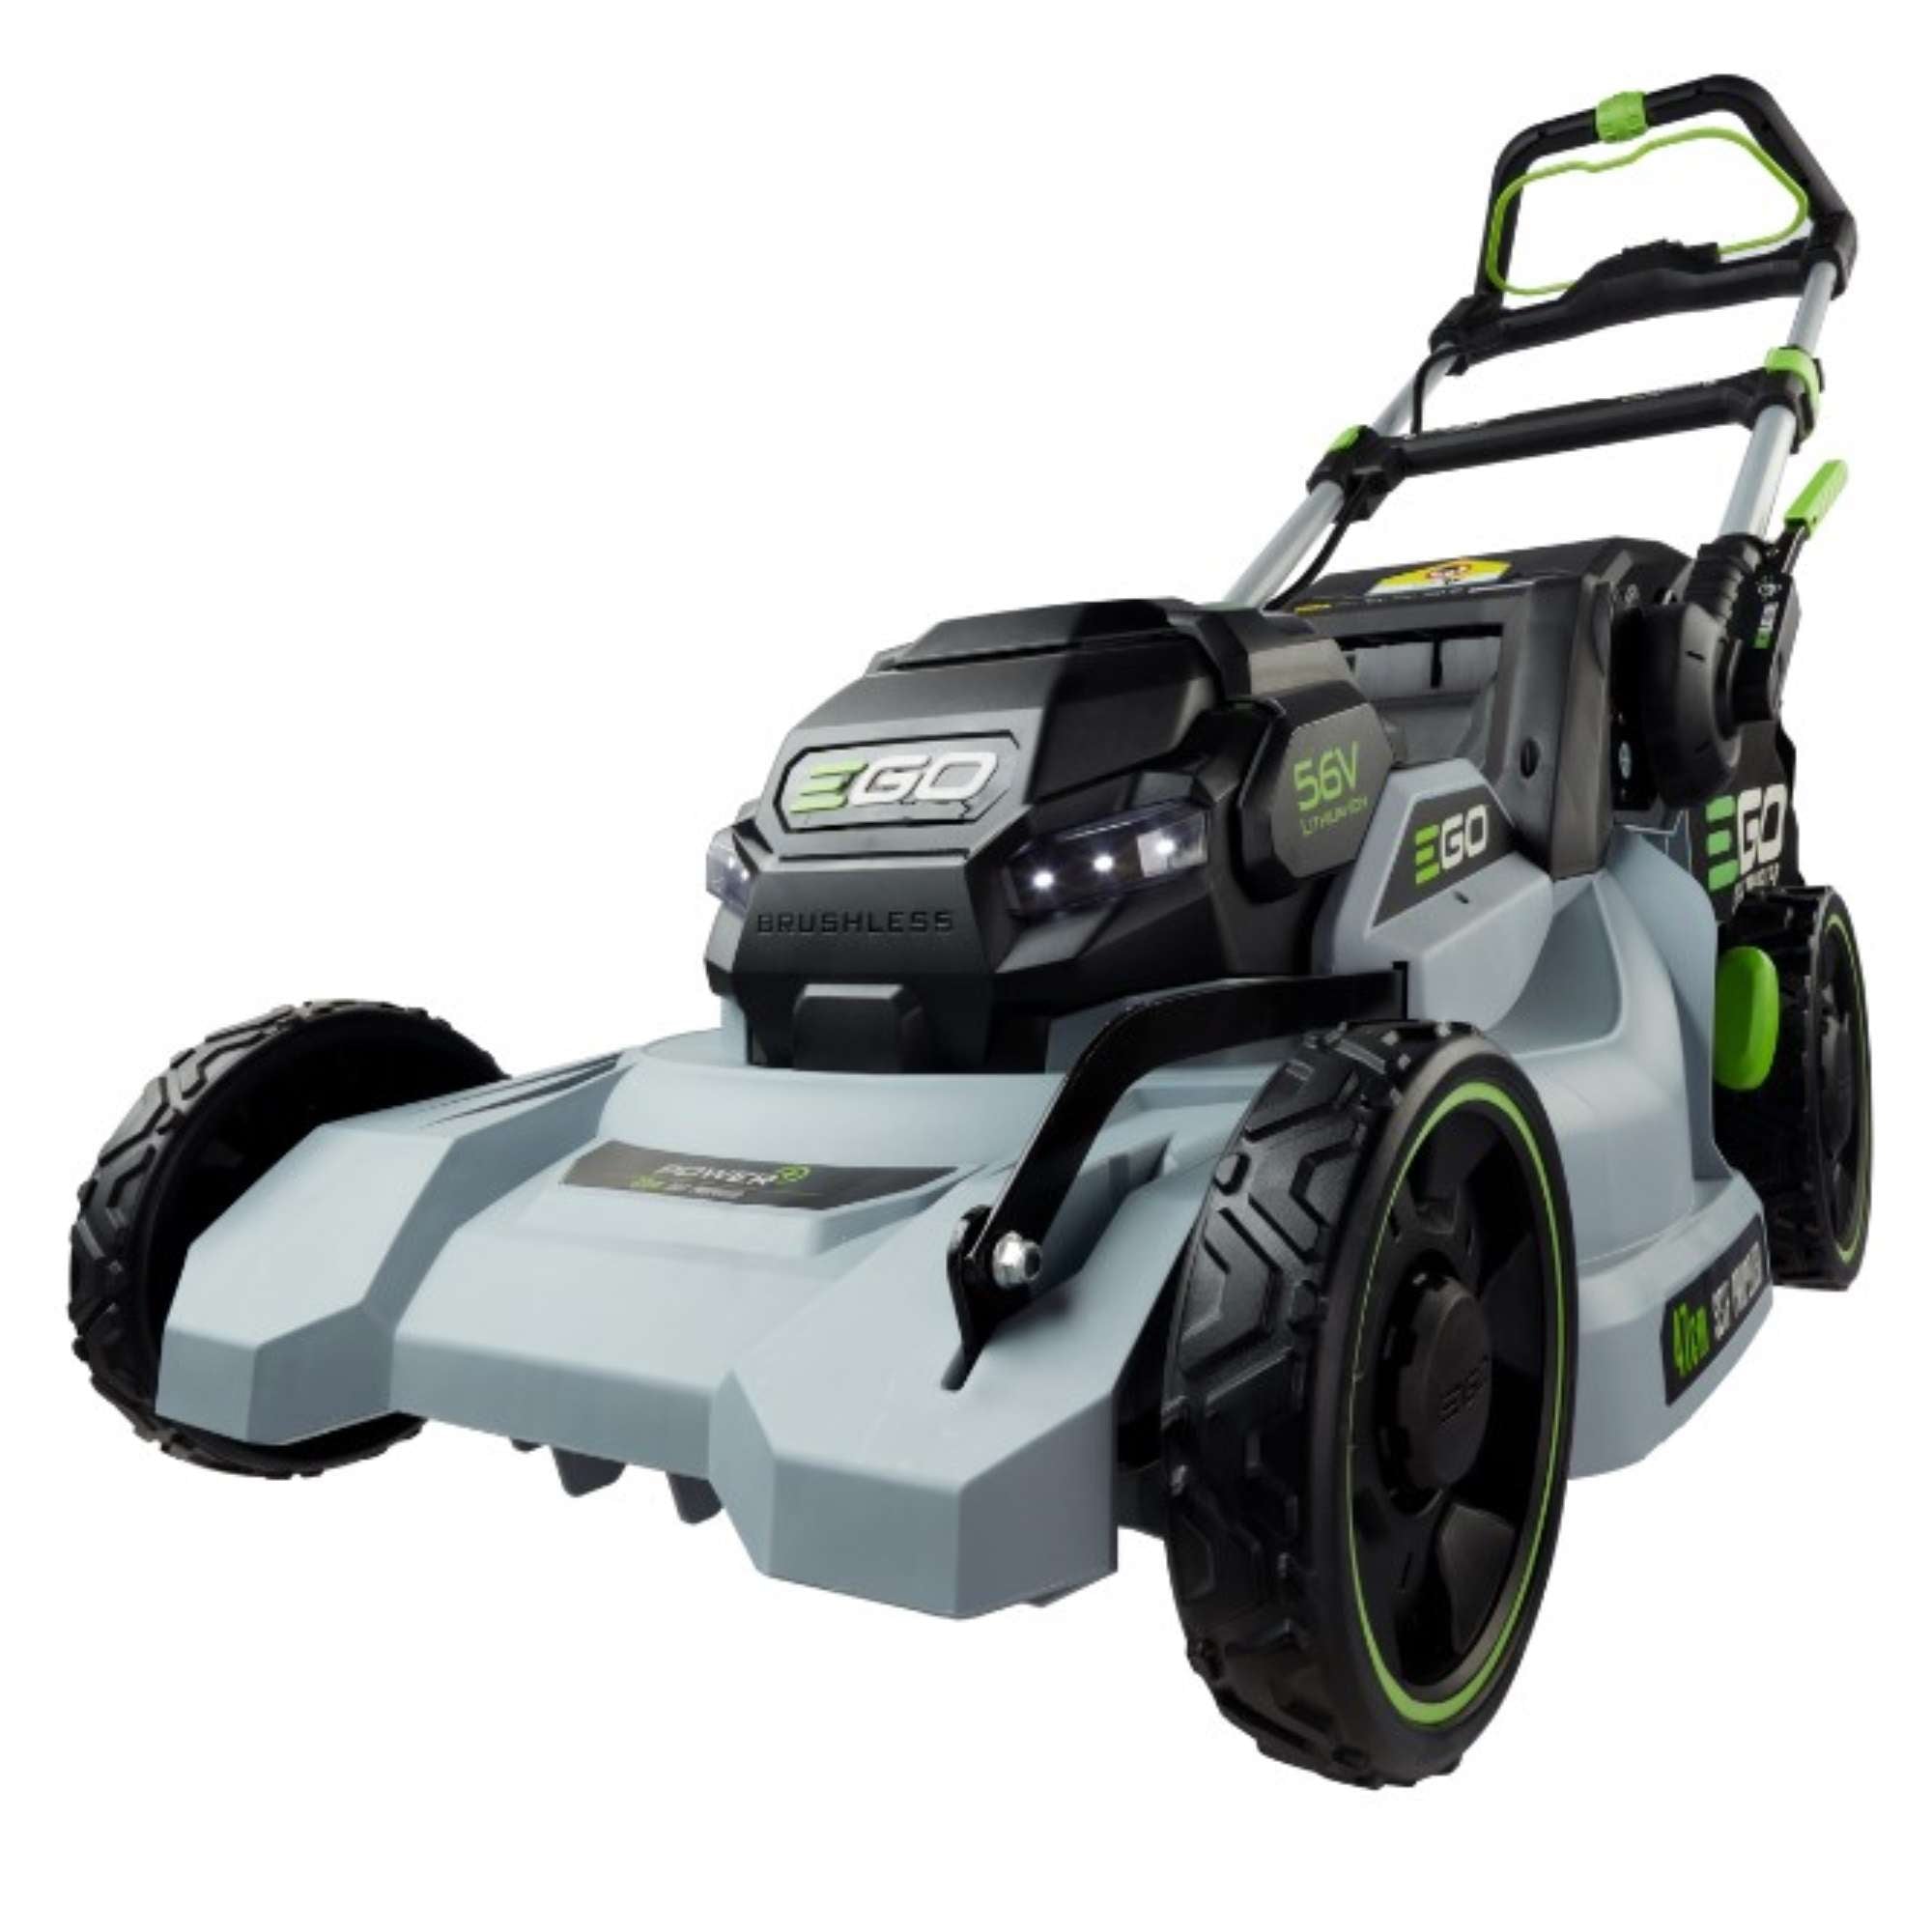 47cm self-propelled lawn mower kit + 5.0ah battery and charger - Ego 48210 LM1903E-SP